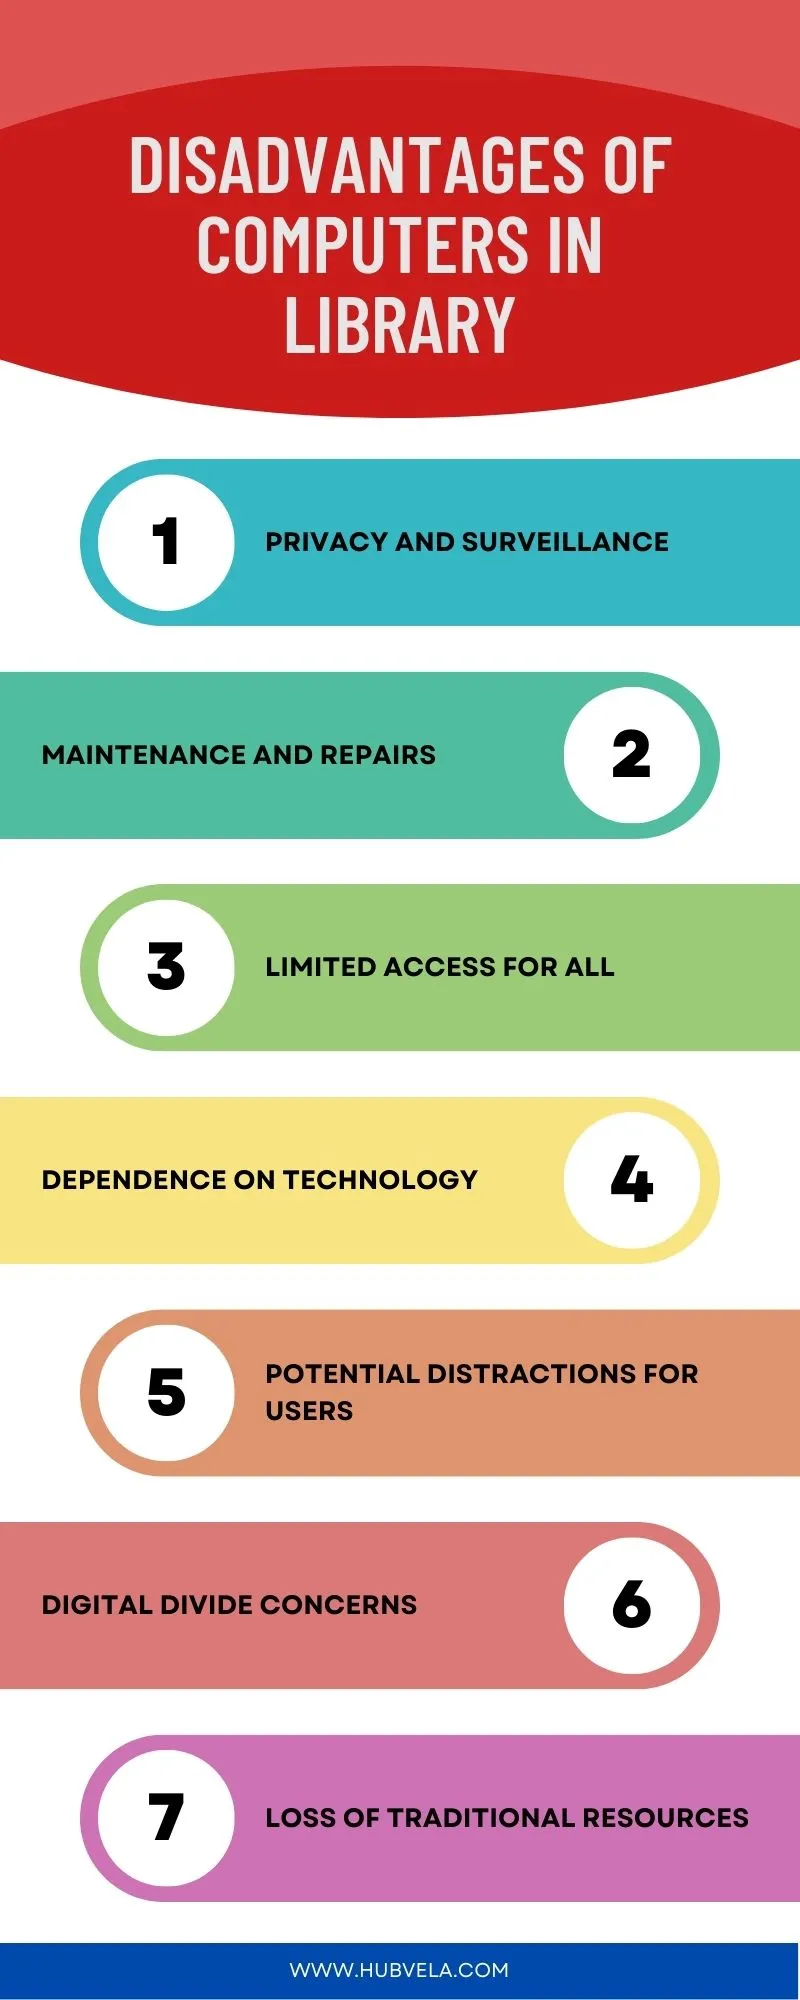 Disadvantages of Computers in Library Infographic